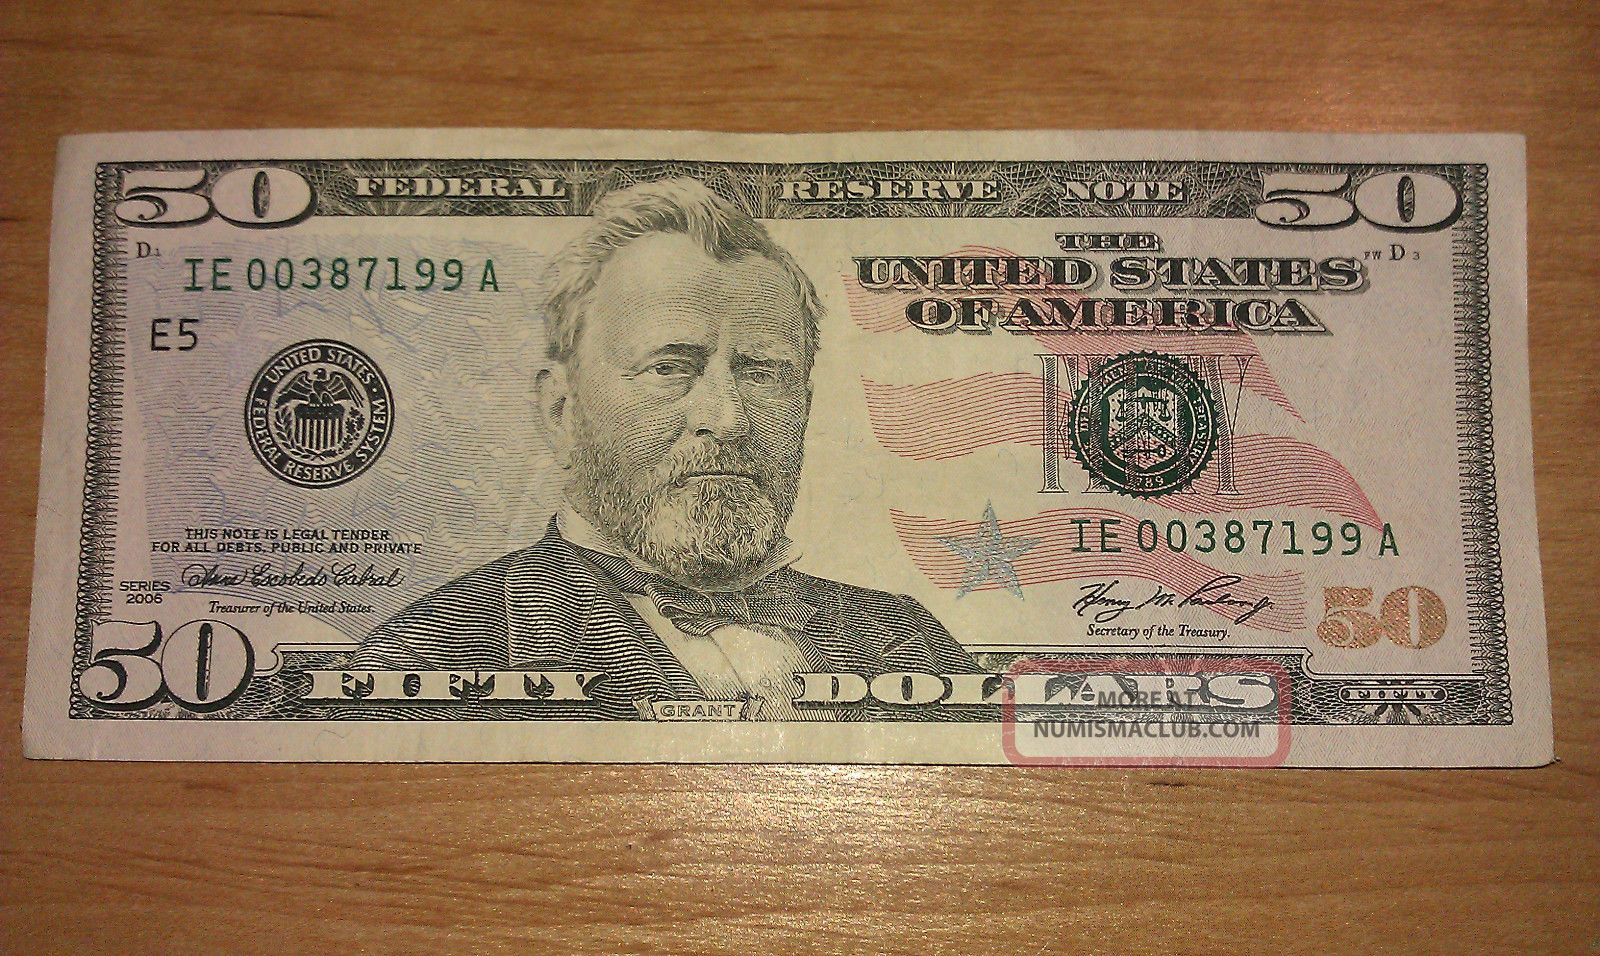 $50 U.  S.  A.  F.  R.  N.  Federal Reserve Note Series 2006 Ie00387199a Small Size Notes photo